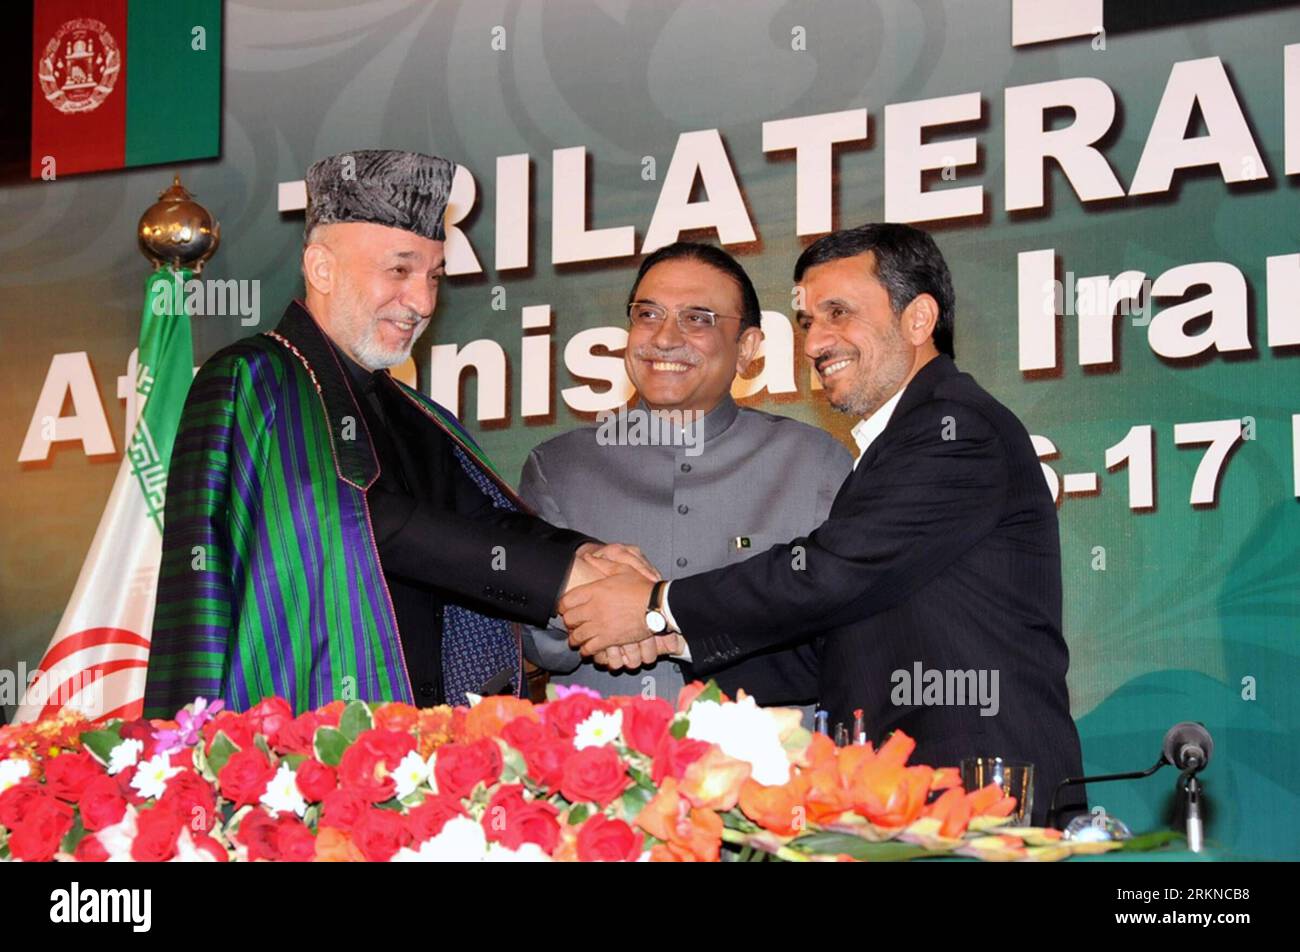 Bildnummer: 57083807  Datum: 17.02.2012  Copyright: imago/Xinhua (120217) -- ISLAMABAD, Feb. 17, 2012 (Xinhua) -- Afghanistan s President Hamid Karzai (L), Pakistani President Asif Ali Zardari (C) and Iranian President Mahmoud Ahmadinejad join hands after a joint press conference in Islamabad, capital of Pakistan, on Feb. 17, 2012. Pakistan, Iran and Afghanistan on Friday pledged full cooperation in Afghan peace process and agreed to step up efforts to root out extremism and terrorism. (Xinhua/Ahmad Kamal) (zjl) PAKISTAN-ISLAMABAD-IRAN-AFGHANISTAN-PRESS CONFERENCE PUBLICATIONxNOTxINxCHN People Stock Photo